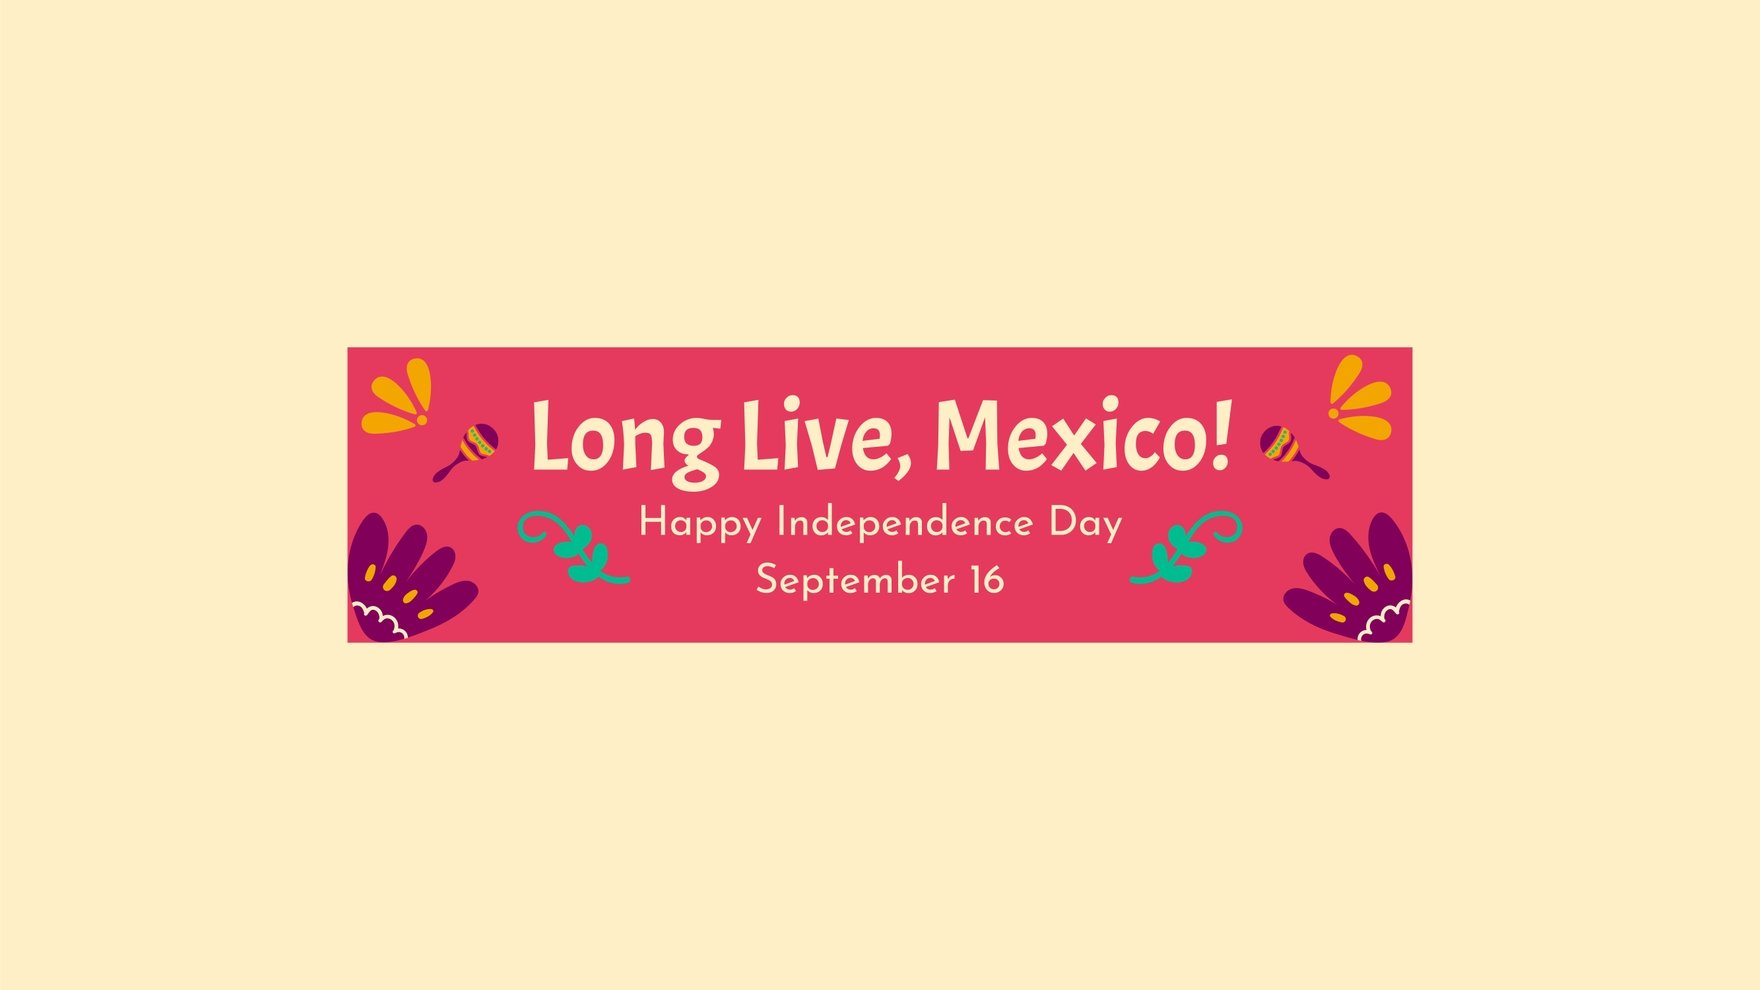 Free Mexican Independence Day Youtube Banner in Word, Google Docs, Illustrator, PSD, Publisher, EPS, SVG, JPG, PNG